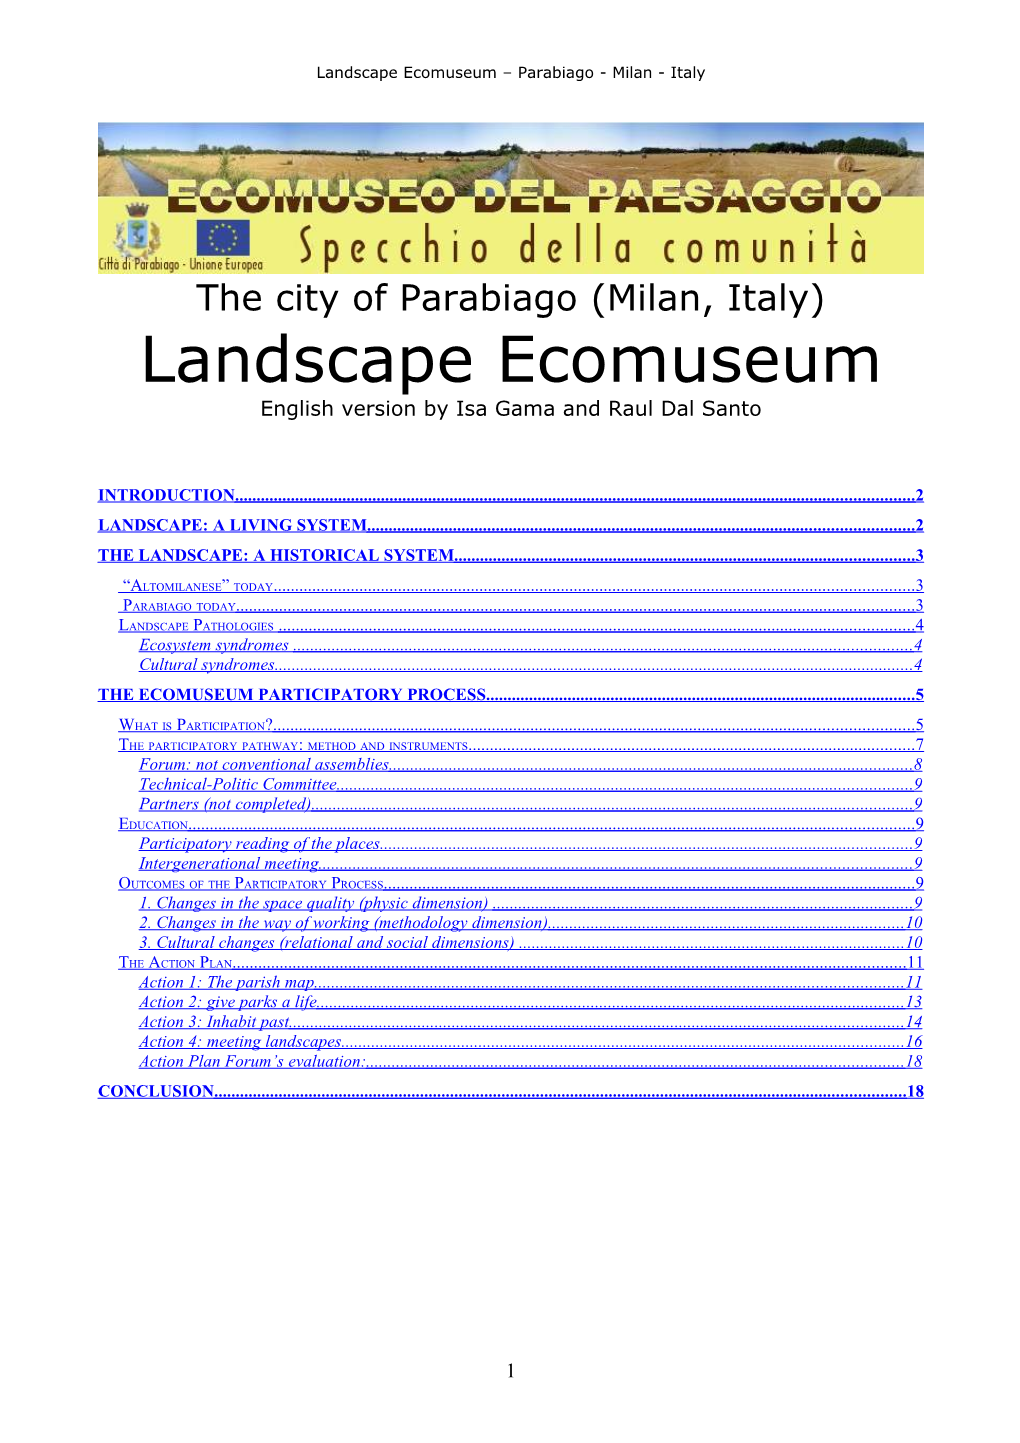 Ecomuseum of the Landscape Has Been Shared and Priorities Have Been Defined to Be Treated in the Thematic Groups